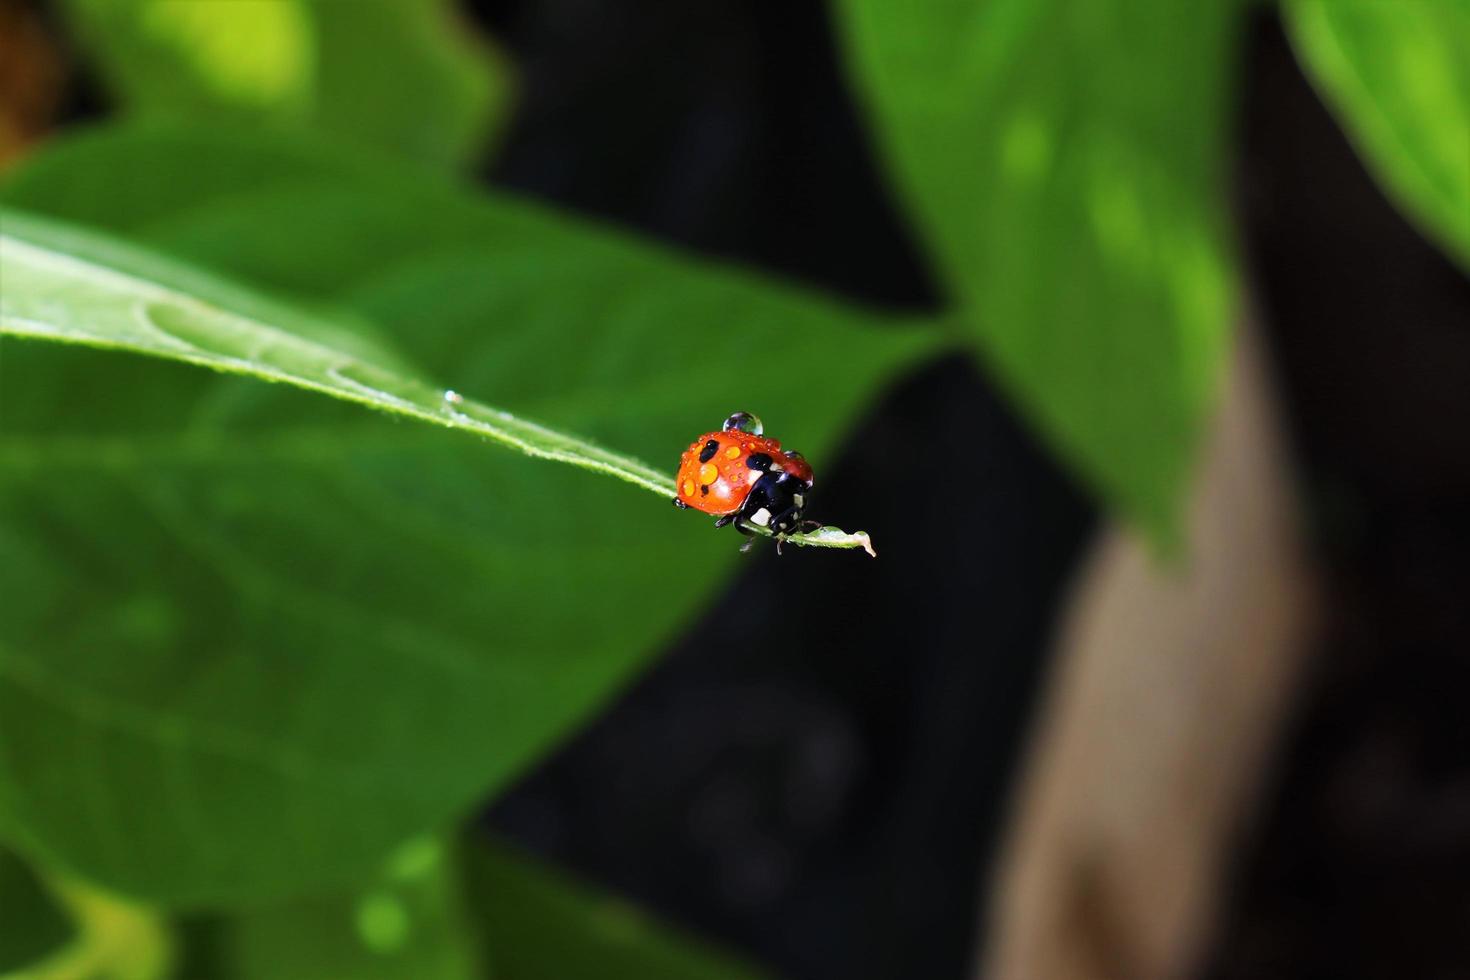 Ladybug sitting on leaf with water drops photo